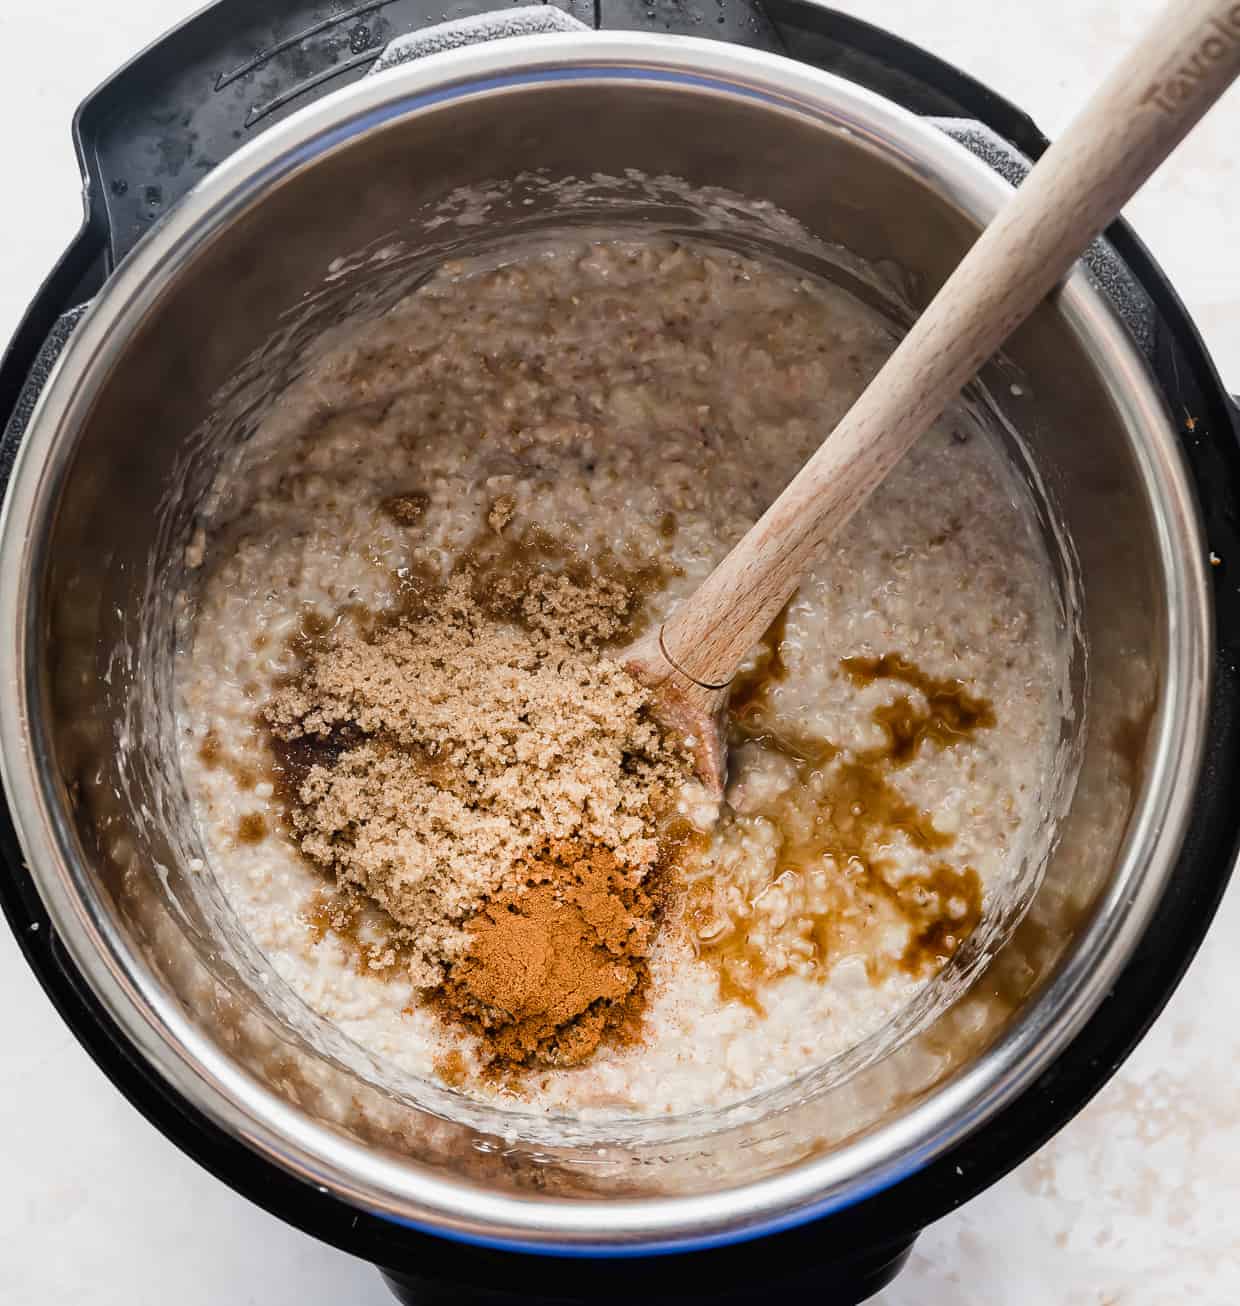 An instant pot full of Banana Steel Cut Oats topped with cinnamon, brown sugar, and vanilla.